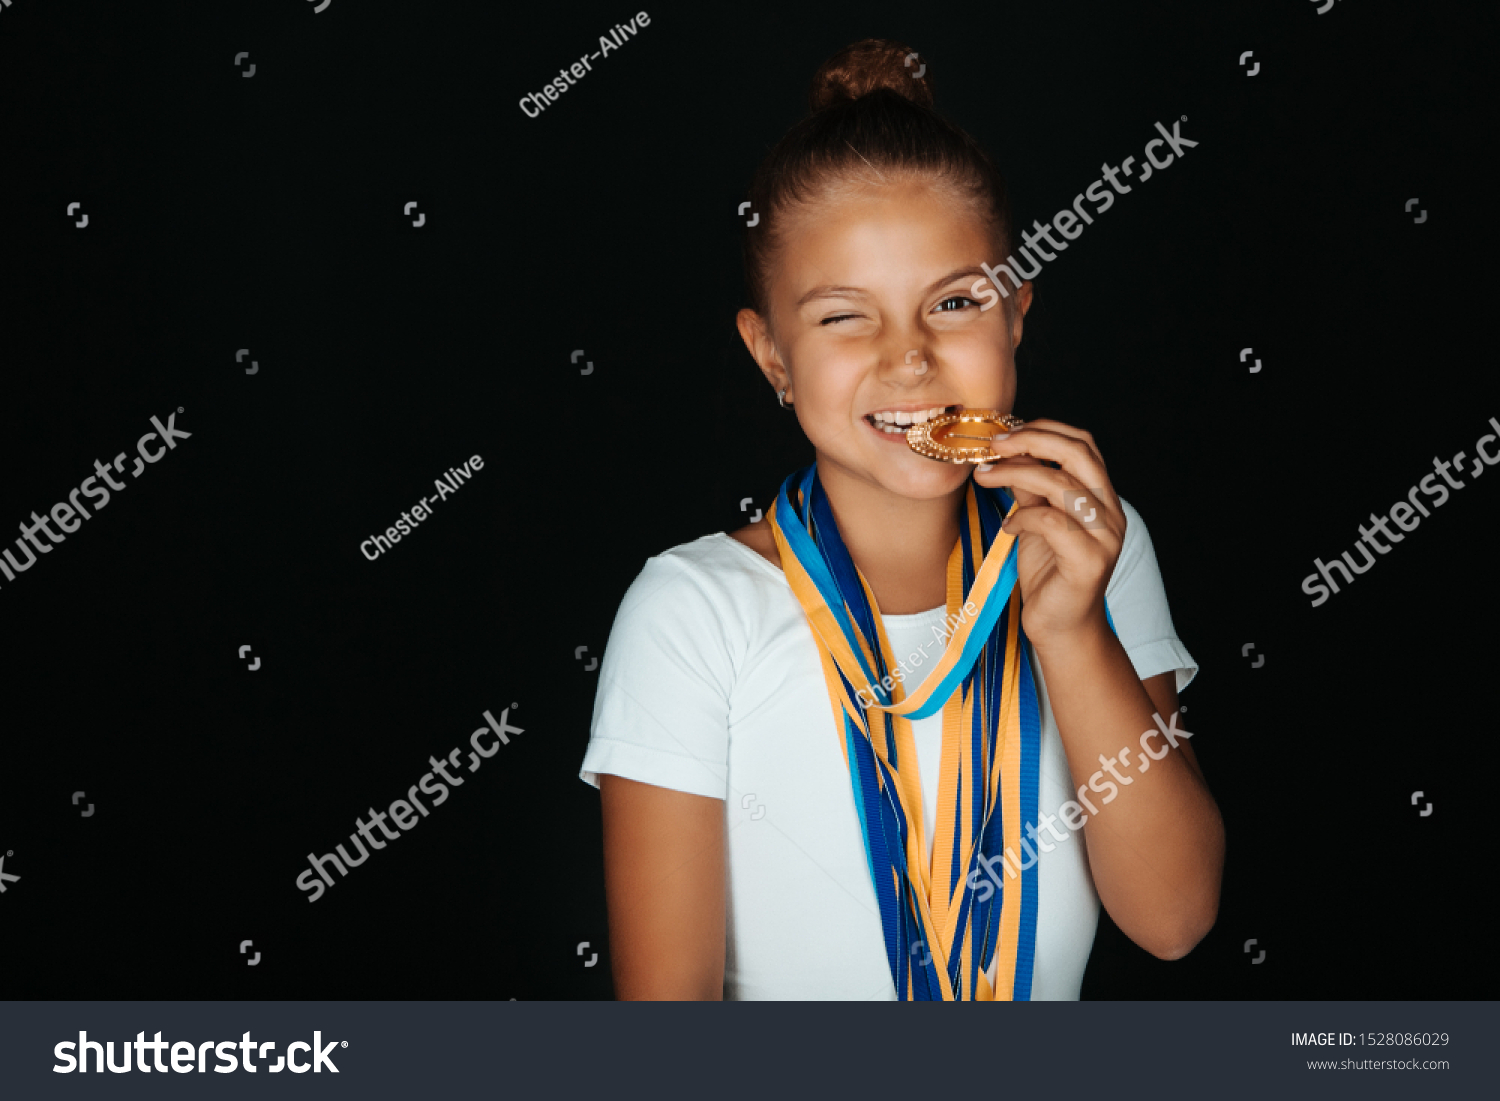 Portrait of little gymnast girl in white bodysuit with medals on her neck biting a medal and winking isolated on black background #1528086029